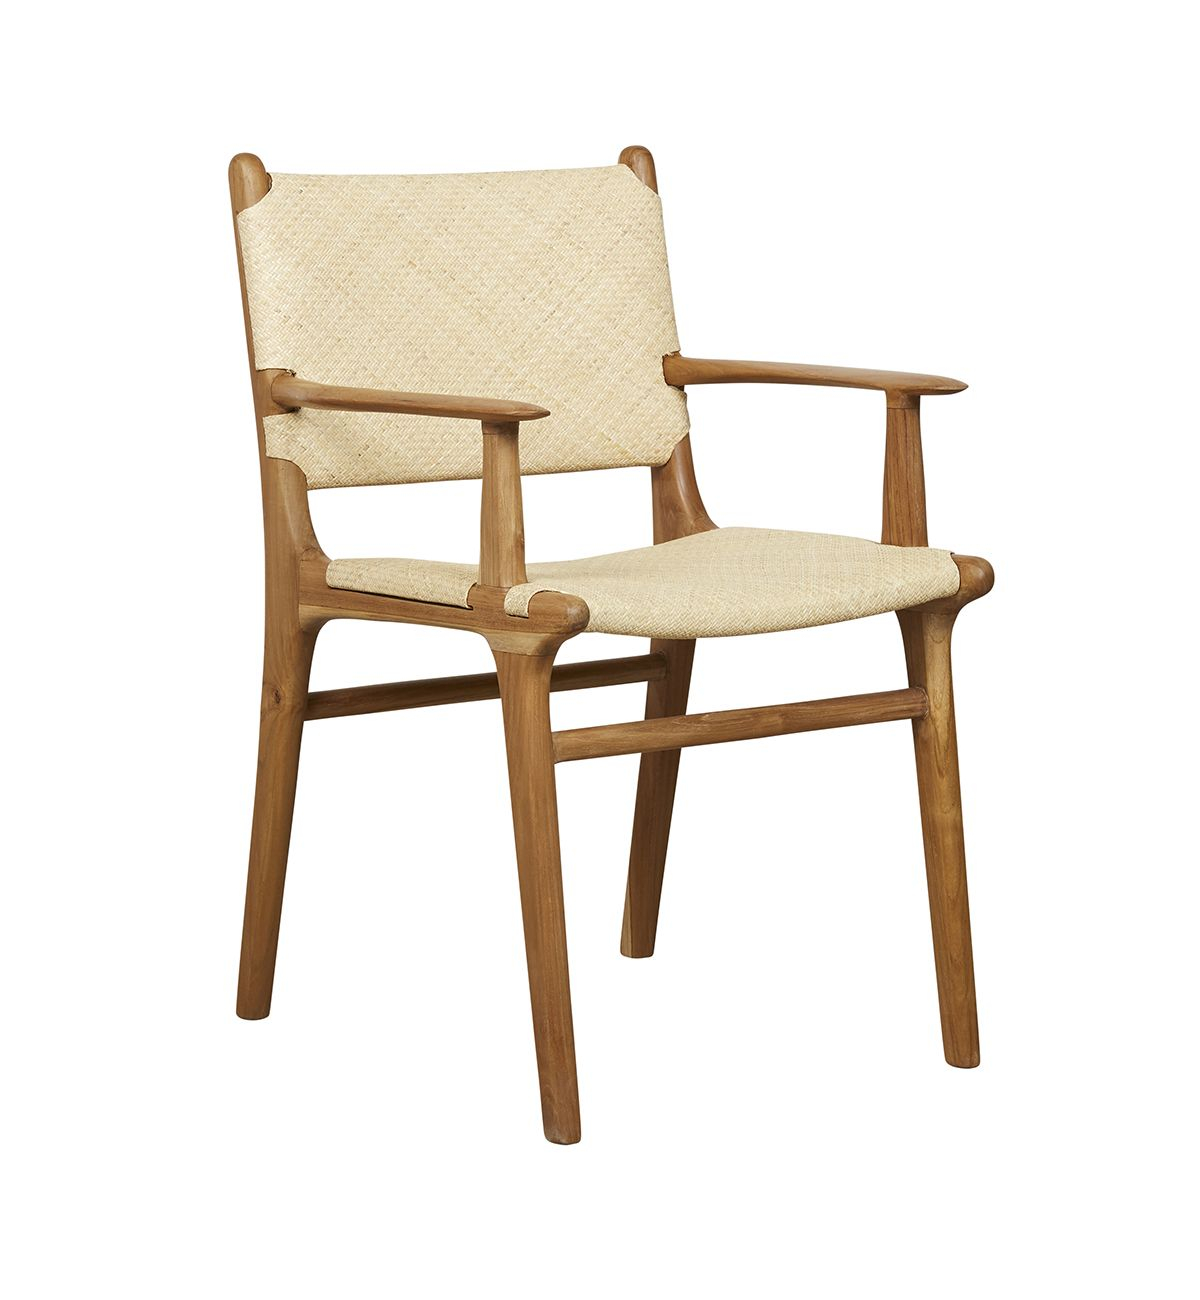 Suma Dining Chair With Arms Teak Natural Rattan pertaining to sizing 1200 X 1300